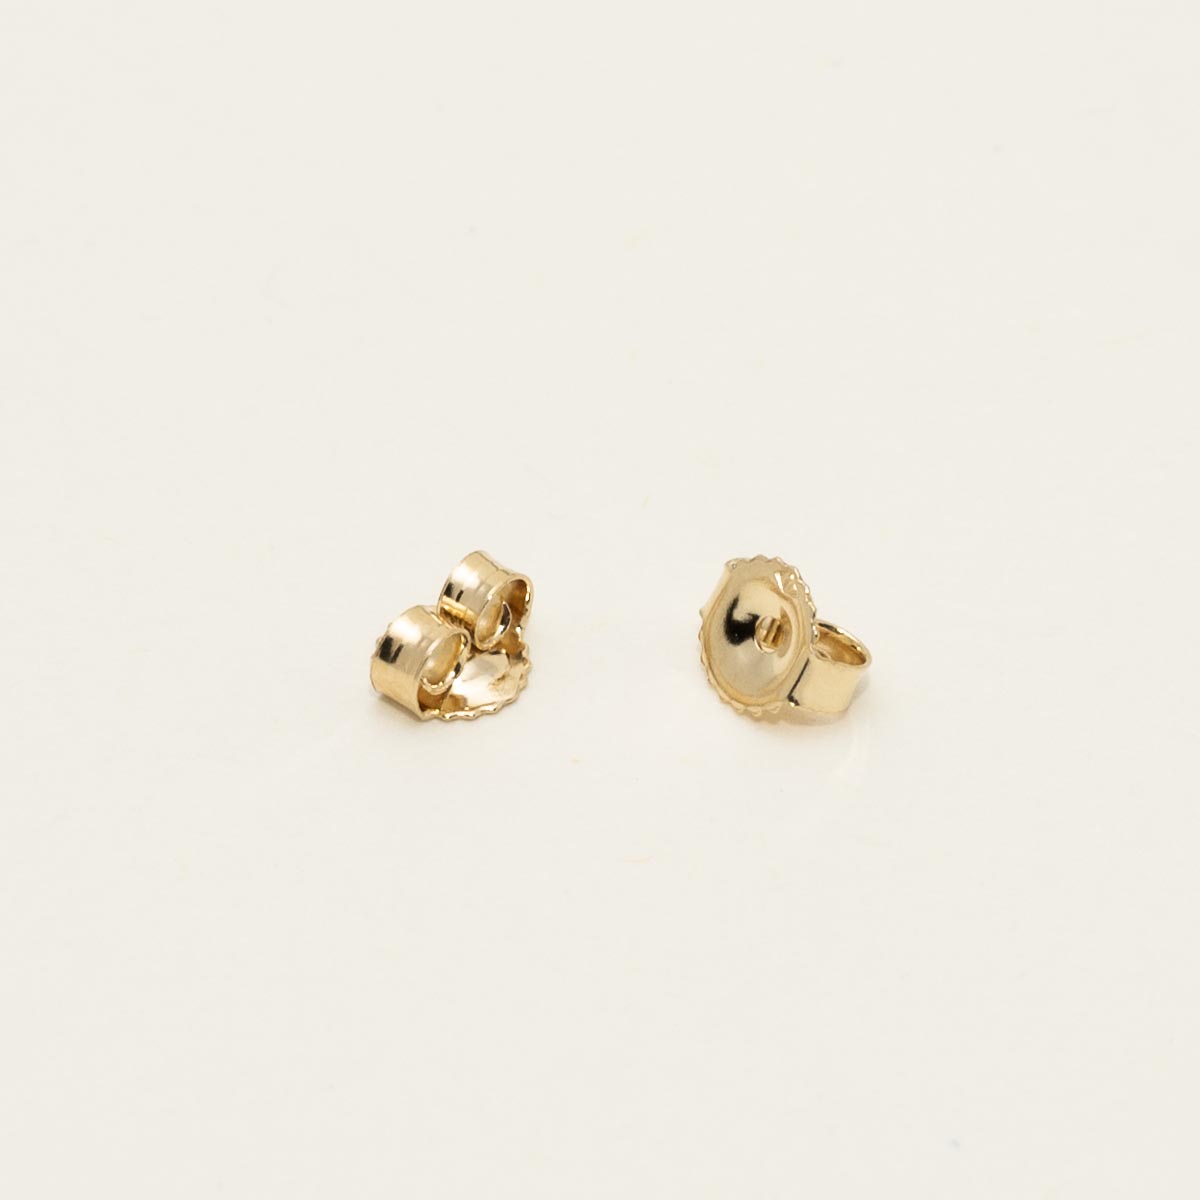 Mastoloni Cultured Freshwater Pearl Stud Earrings in 14kt Yellow Gold (8-8.5mm pearls)